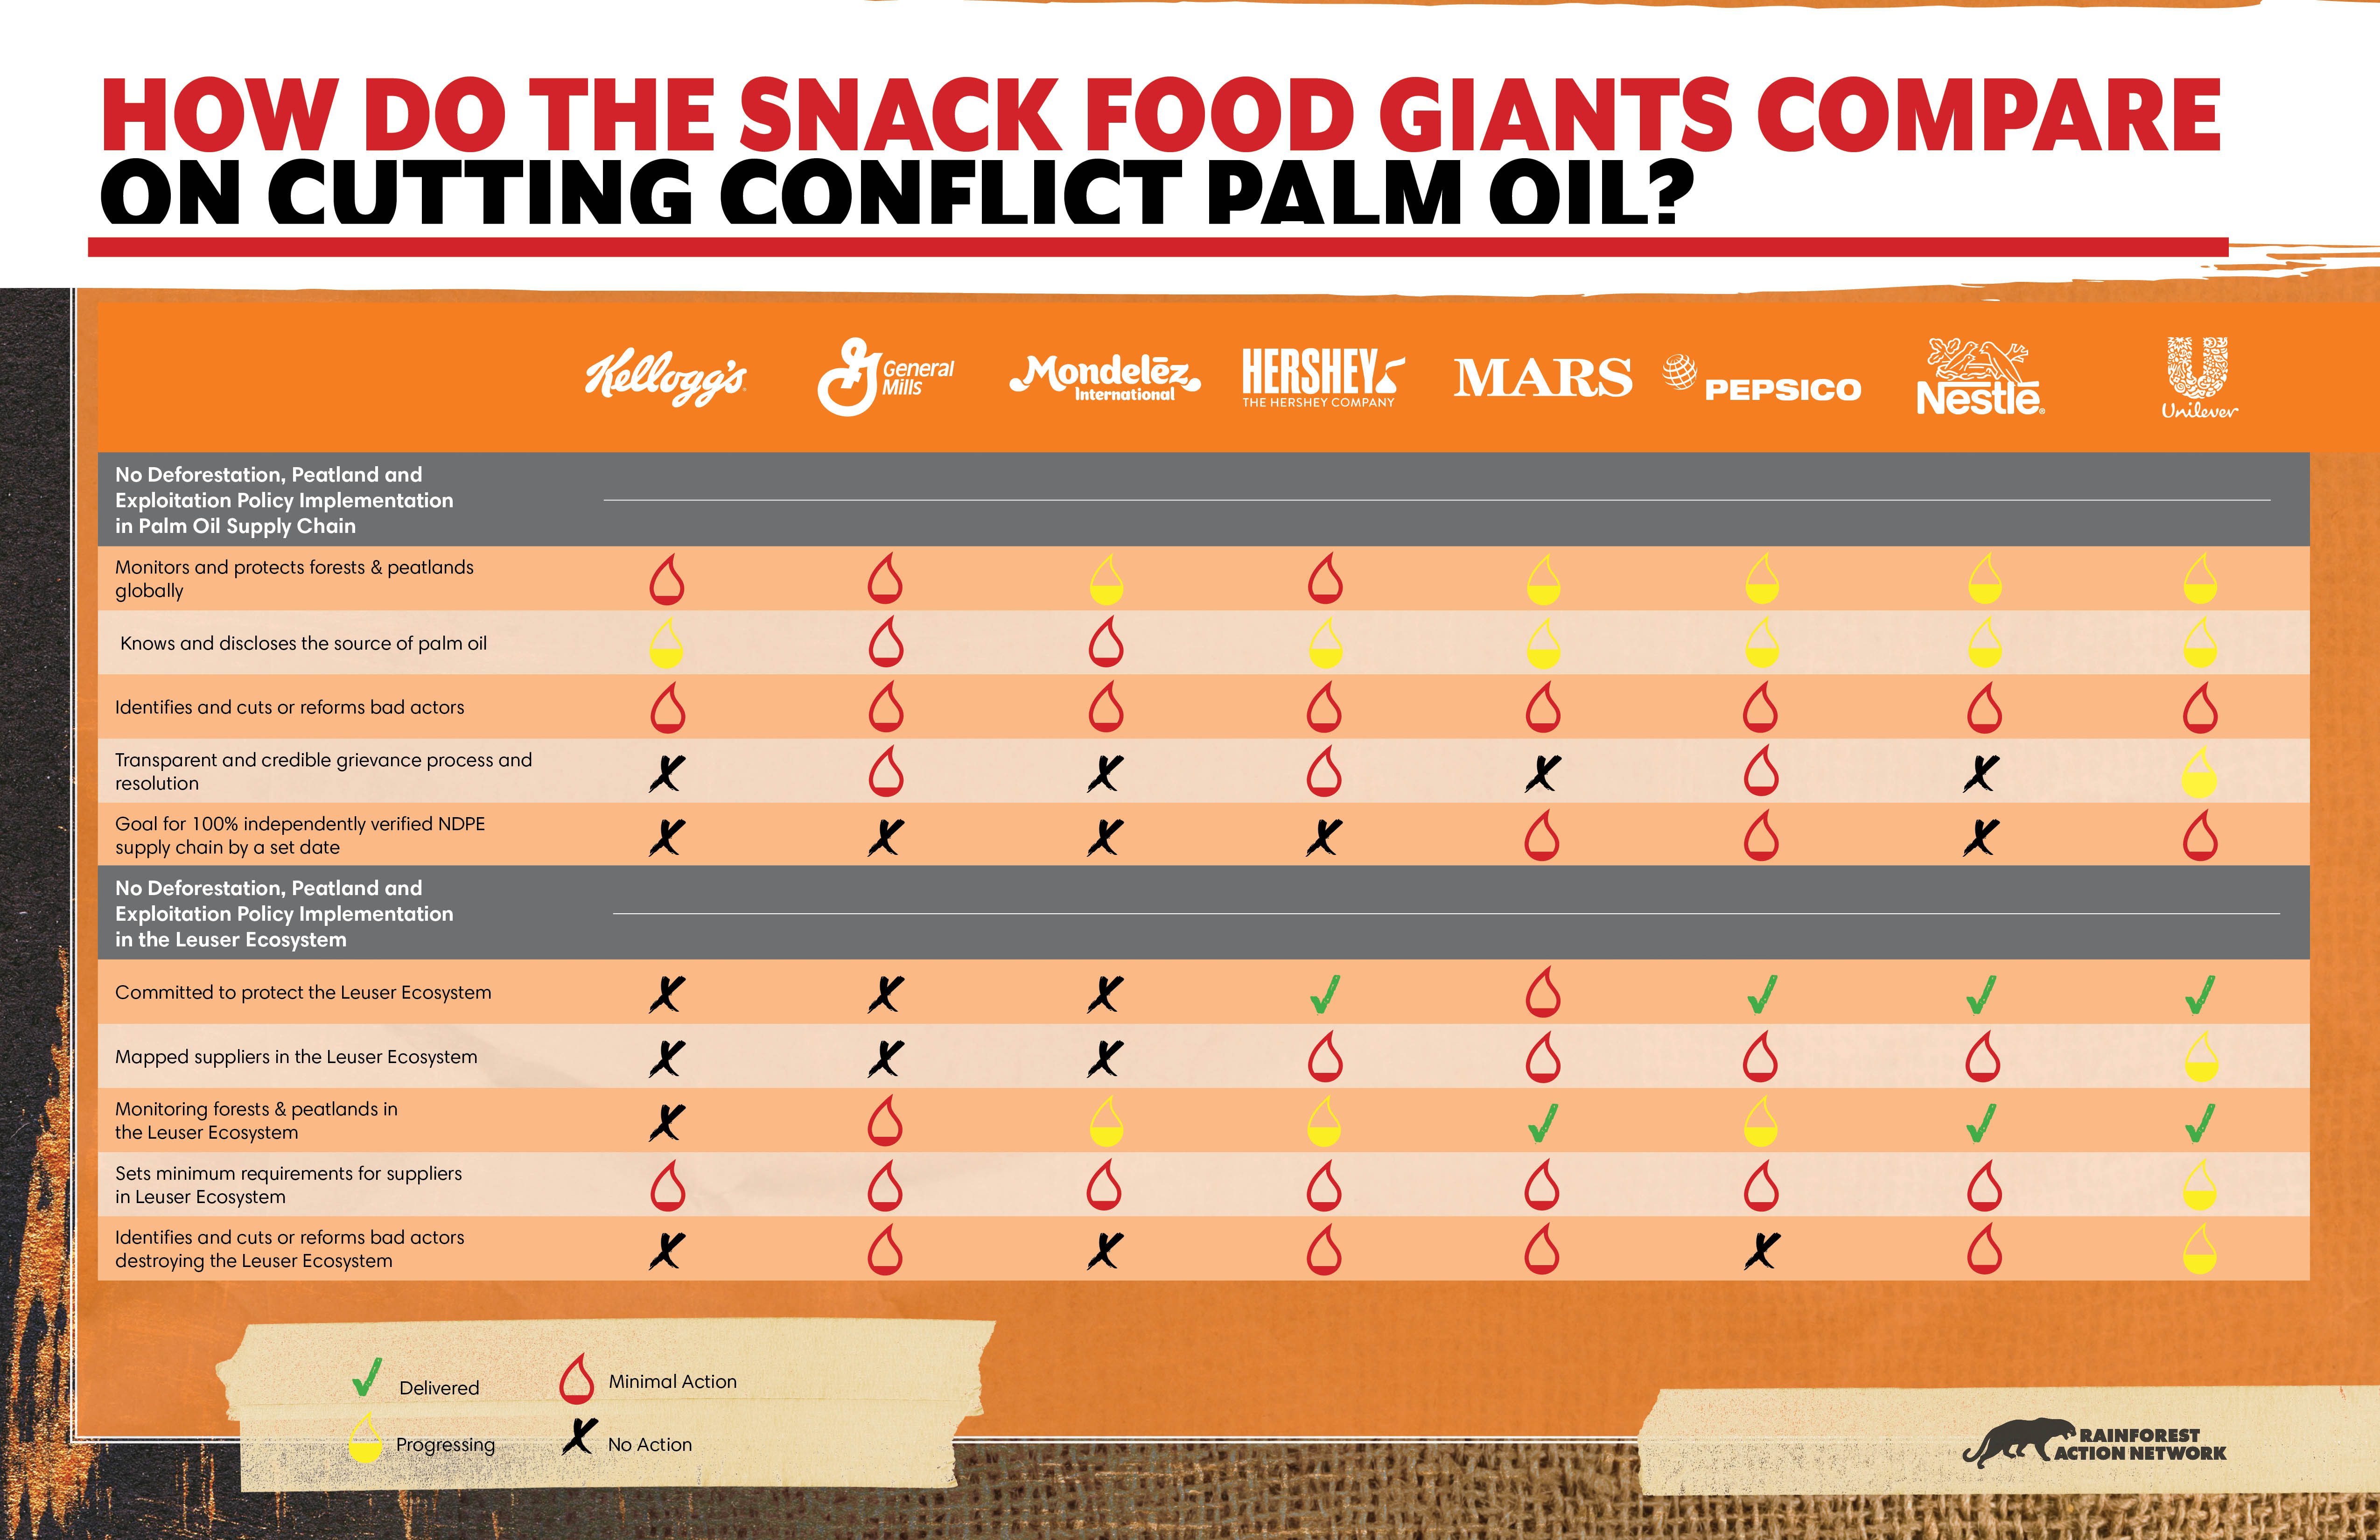 Snack food giant assessment